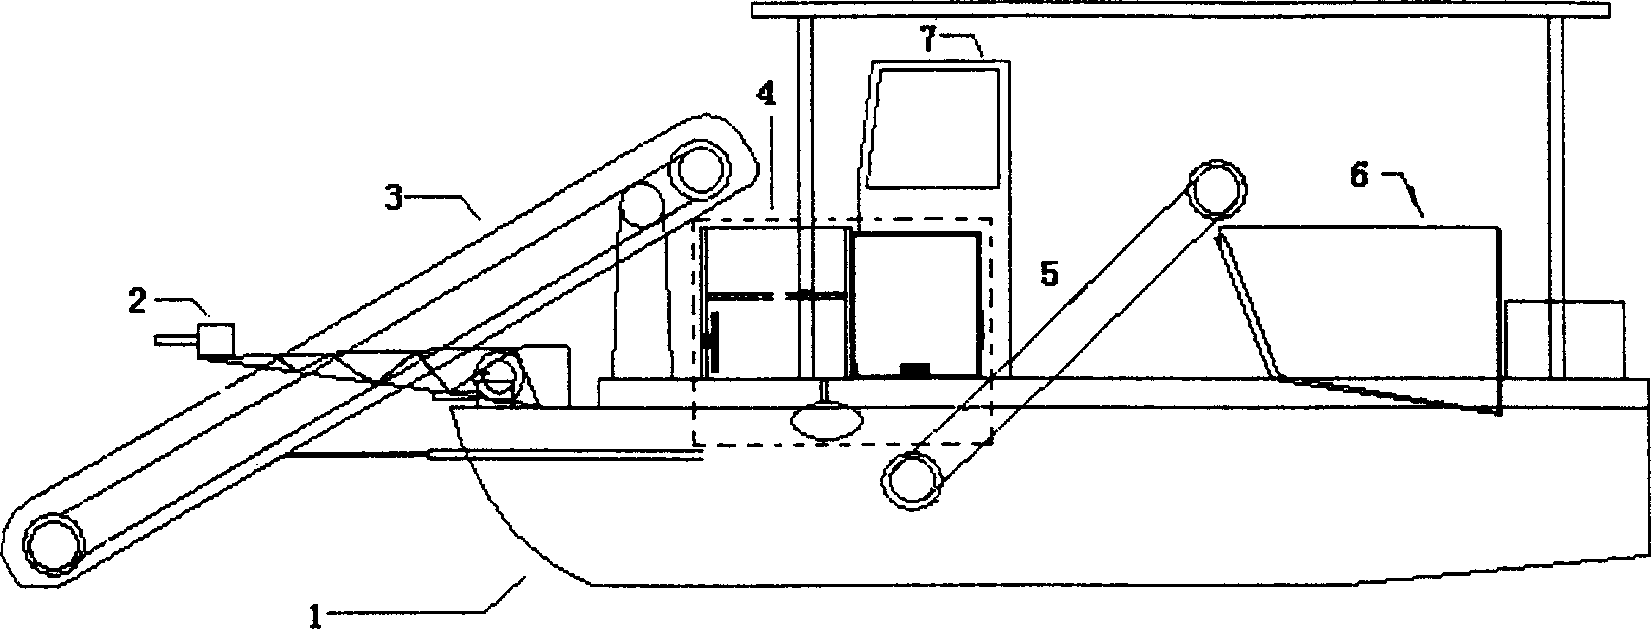 Pipeline apparatus for hyacinth salvage boat